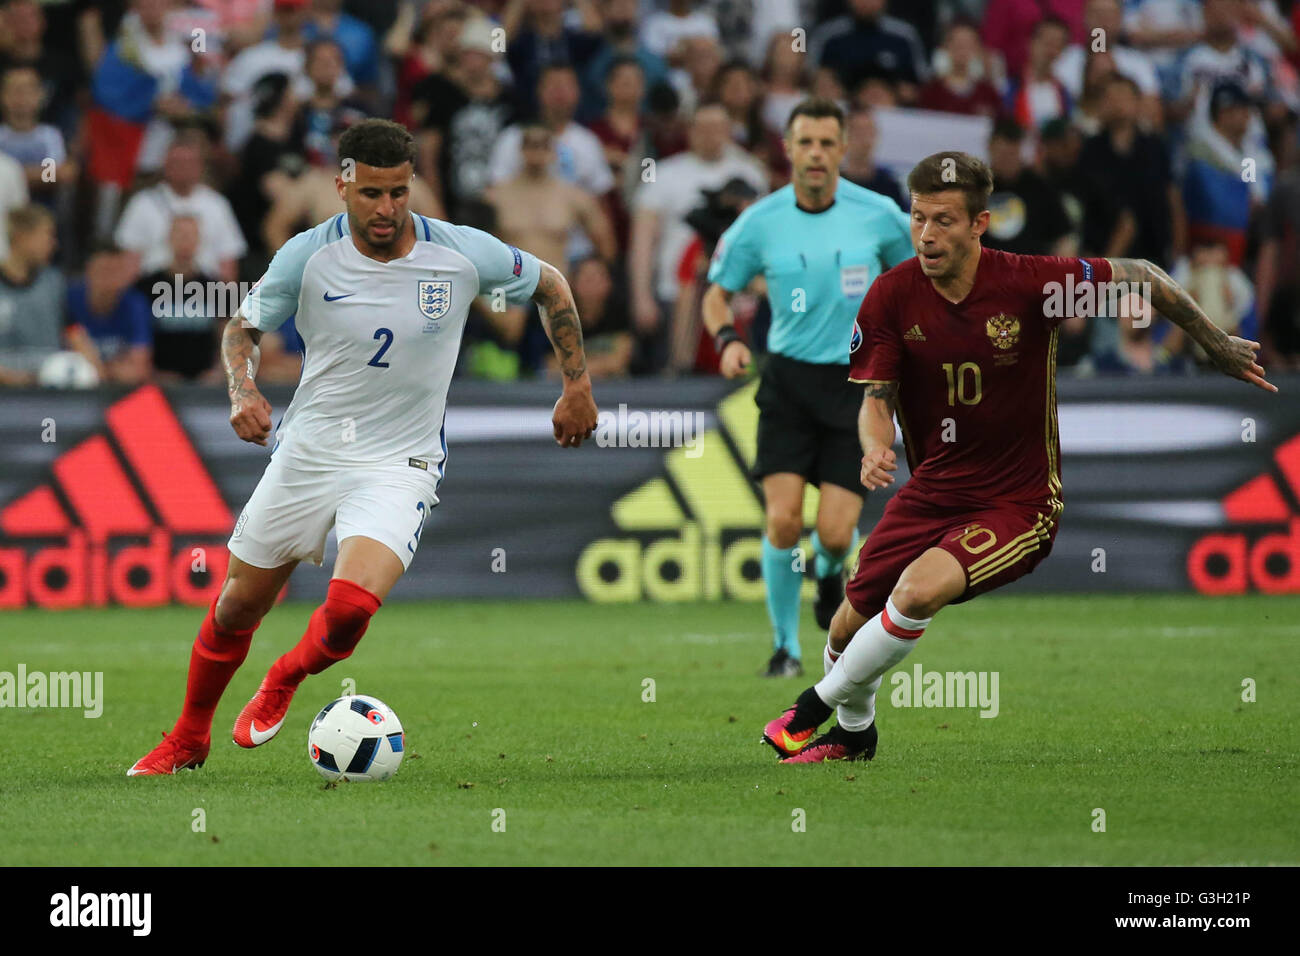 MARSEILLE- FRANCE, JUNE 2016 :Walker and Smolov in action  during football match  of Euro 2016  in France between England vs Russia at the Stade Velodrome   on June 11, 2016 in Marseille. Credit:  marco iacobucci/Alamy Live News Stock Photo